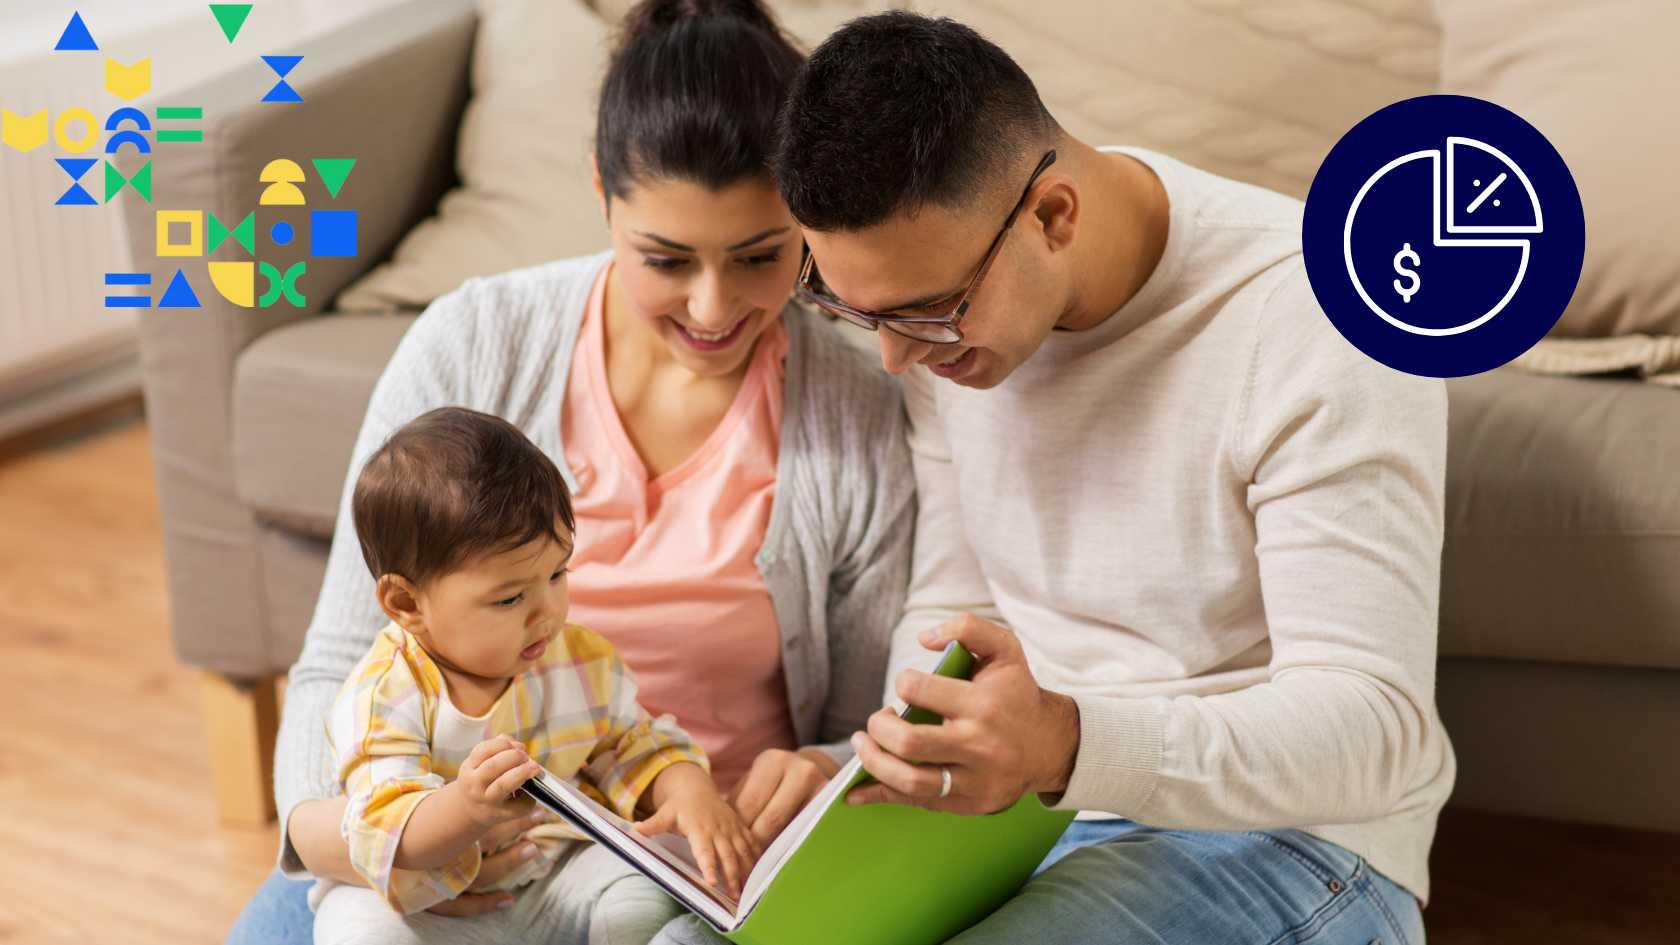 Image of two parents holding a baby on their lap, while the dad reads a book with a green cover to the child, and a pie chart icon with a dollar sign and percentage included to represent financially navigating parental leave